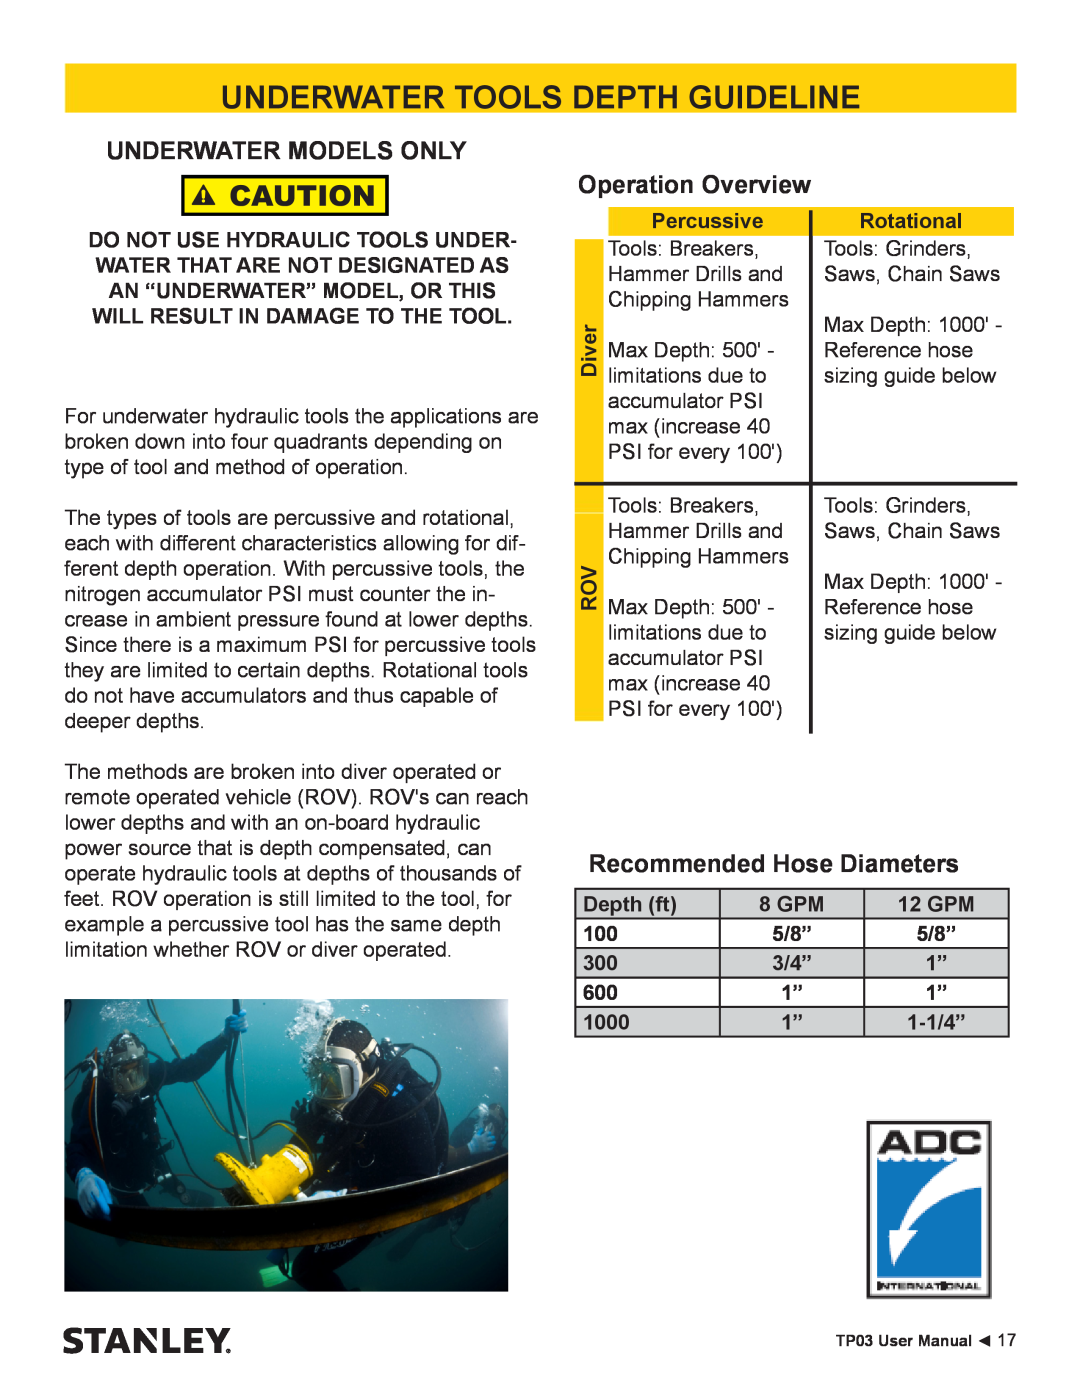 Stanley Black & Decker TP03 Underwater Tools Depth Guideline, Underwater Models Only, Operation Overview, Percussive, 5/8” 